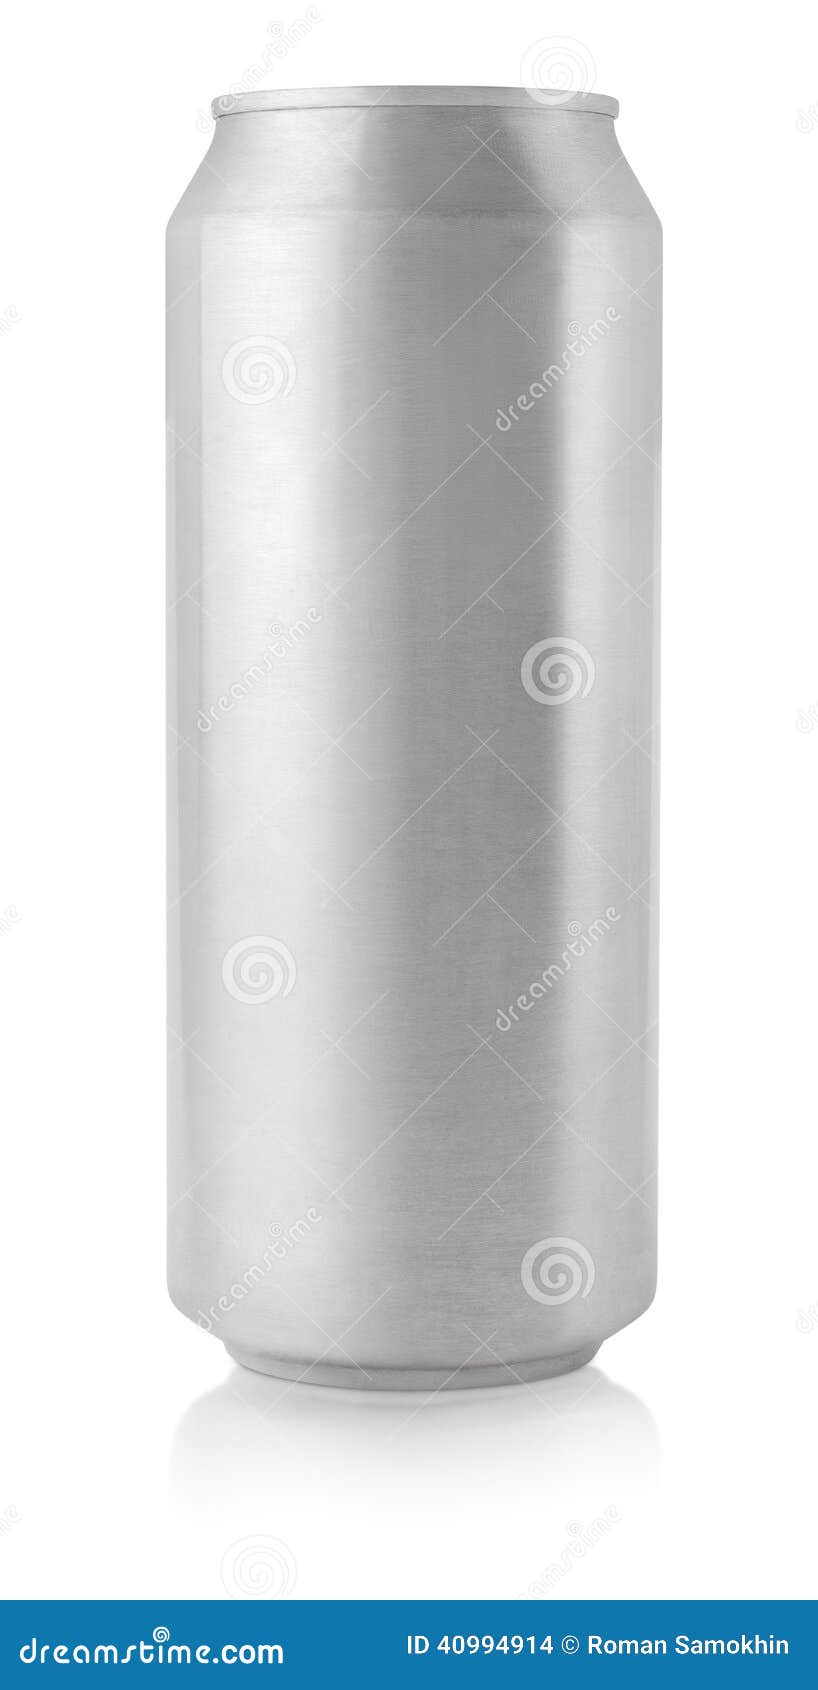 500 ml aluminum beer can stock photo. Image of design - 40994914